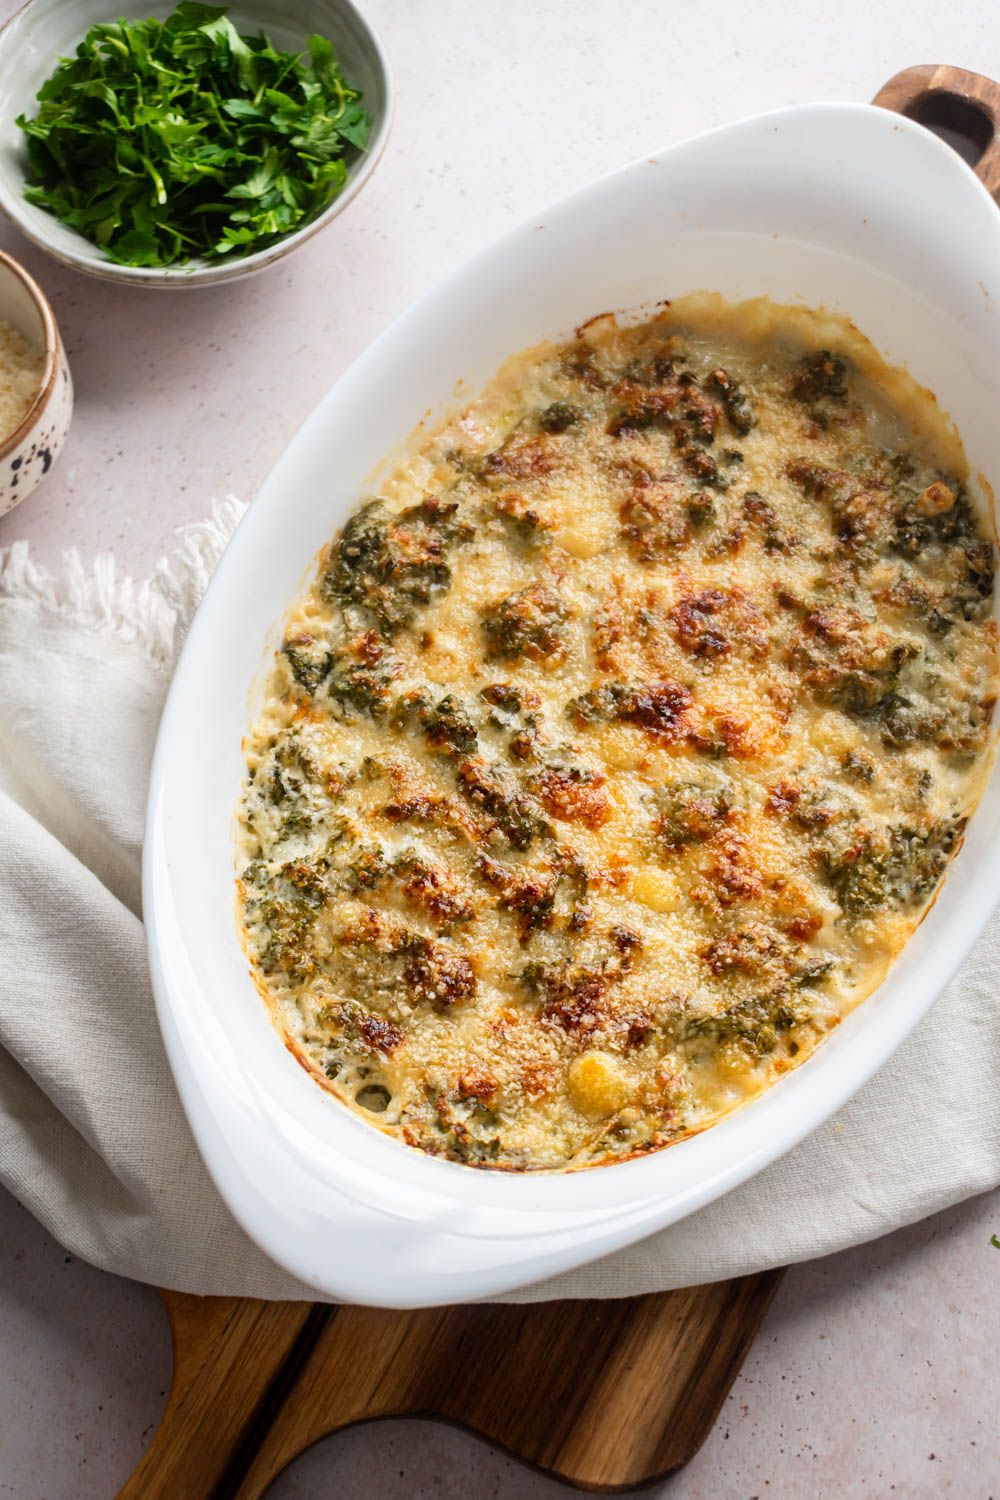 Baked creamed kale with a crispy topping in a baking dish with kale and Parmesan on the side.